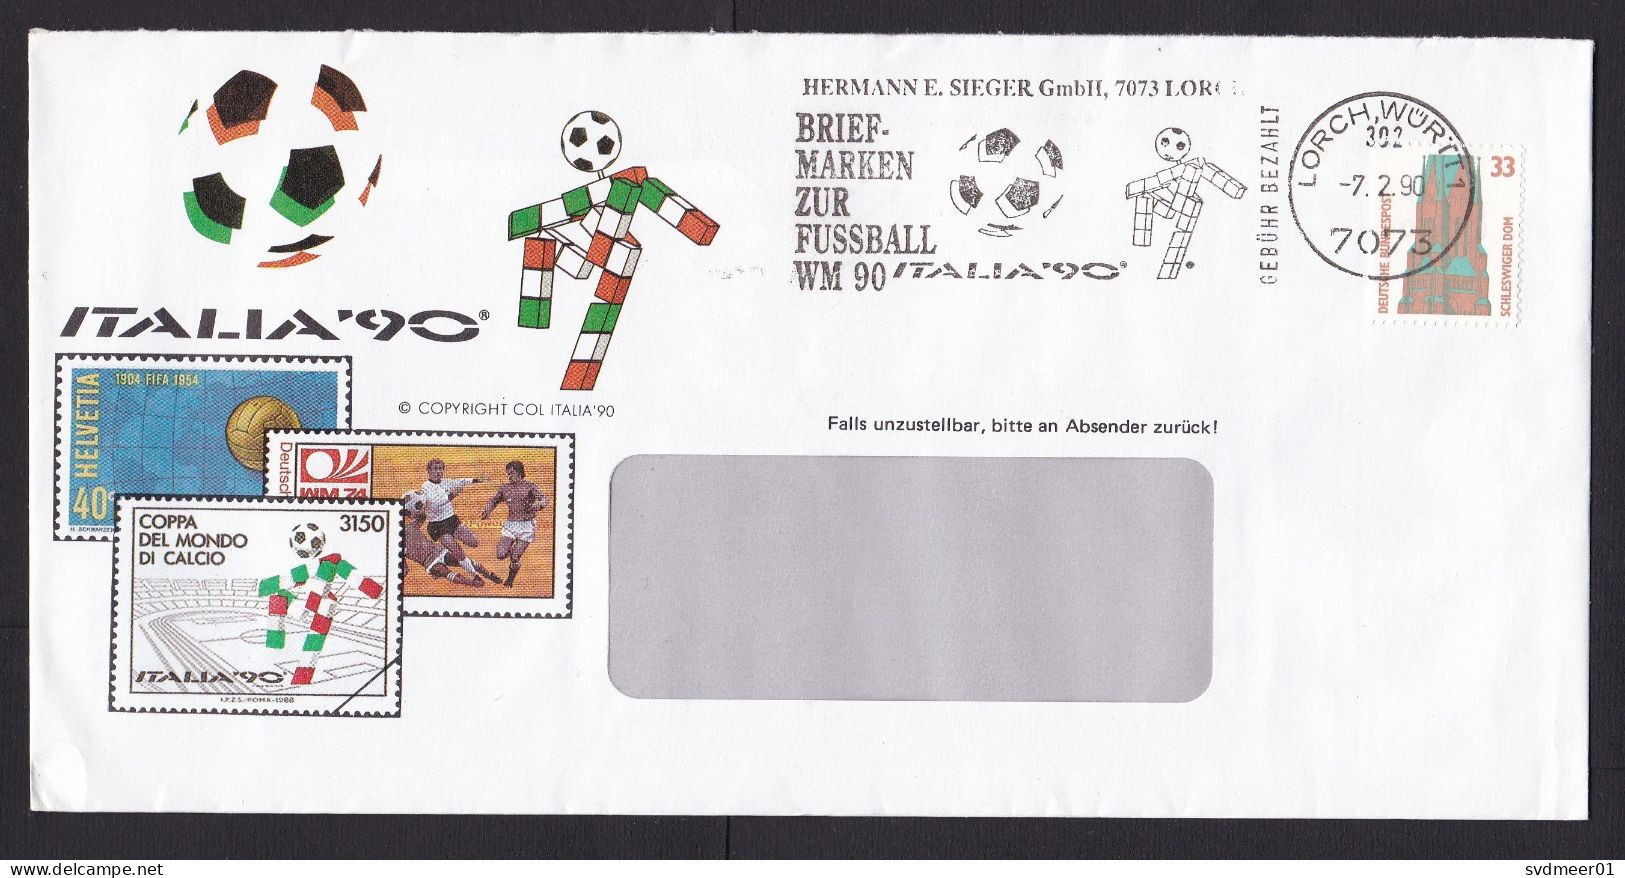 Germany: Advertorial Cover, 1990, 1 Stamp, Church, Cancel Soccer, Football, Sports, Sent By Sieger (traces Of Use) - Lettres & Documents